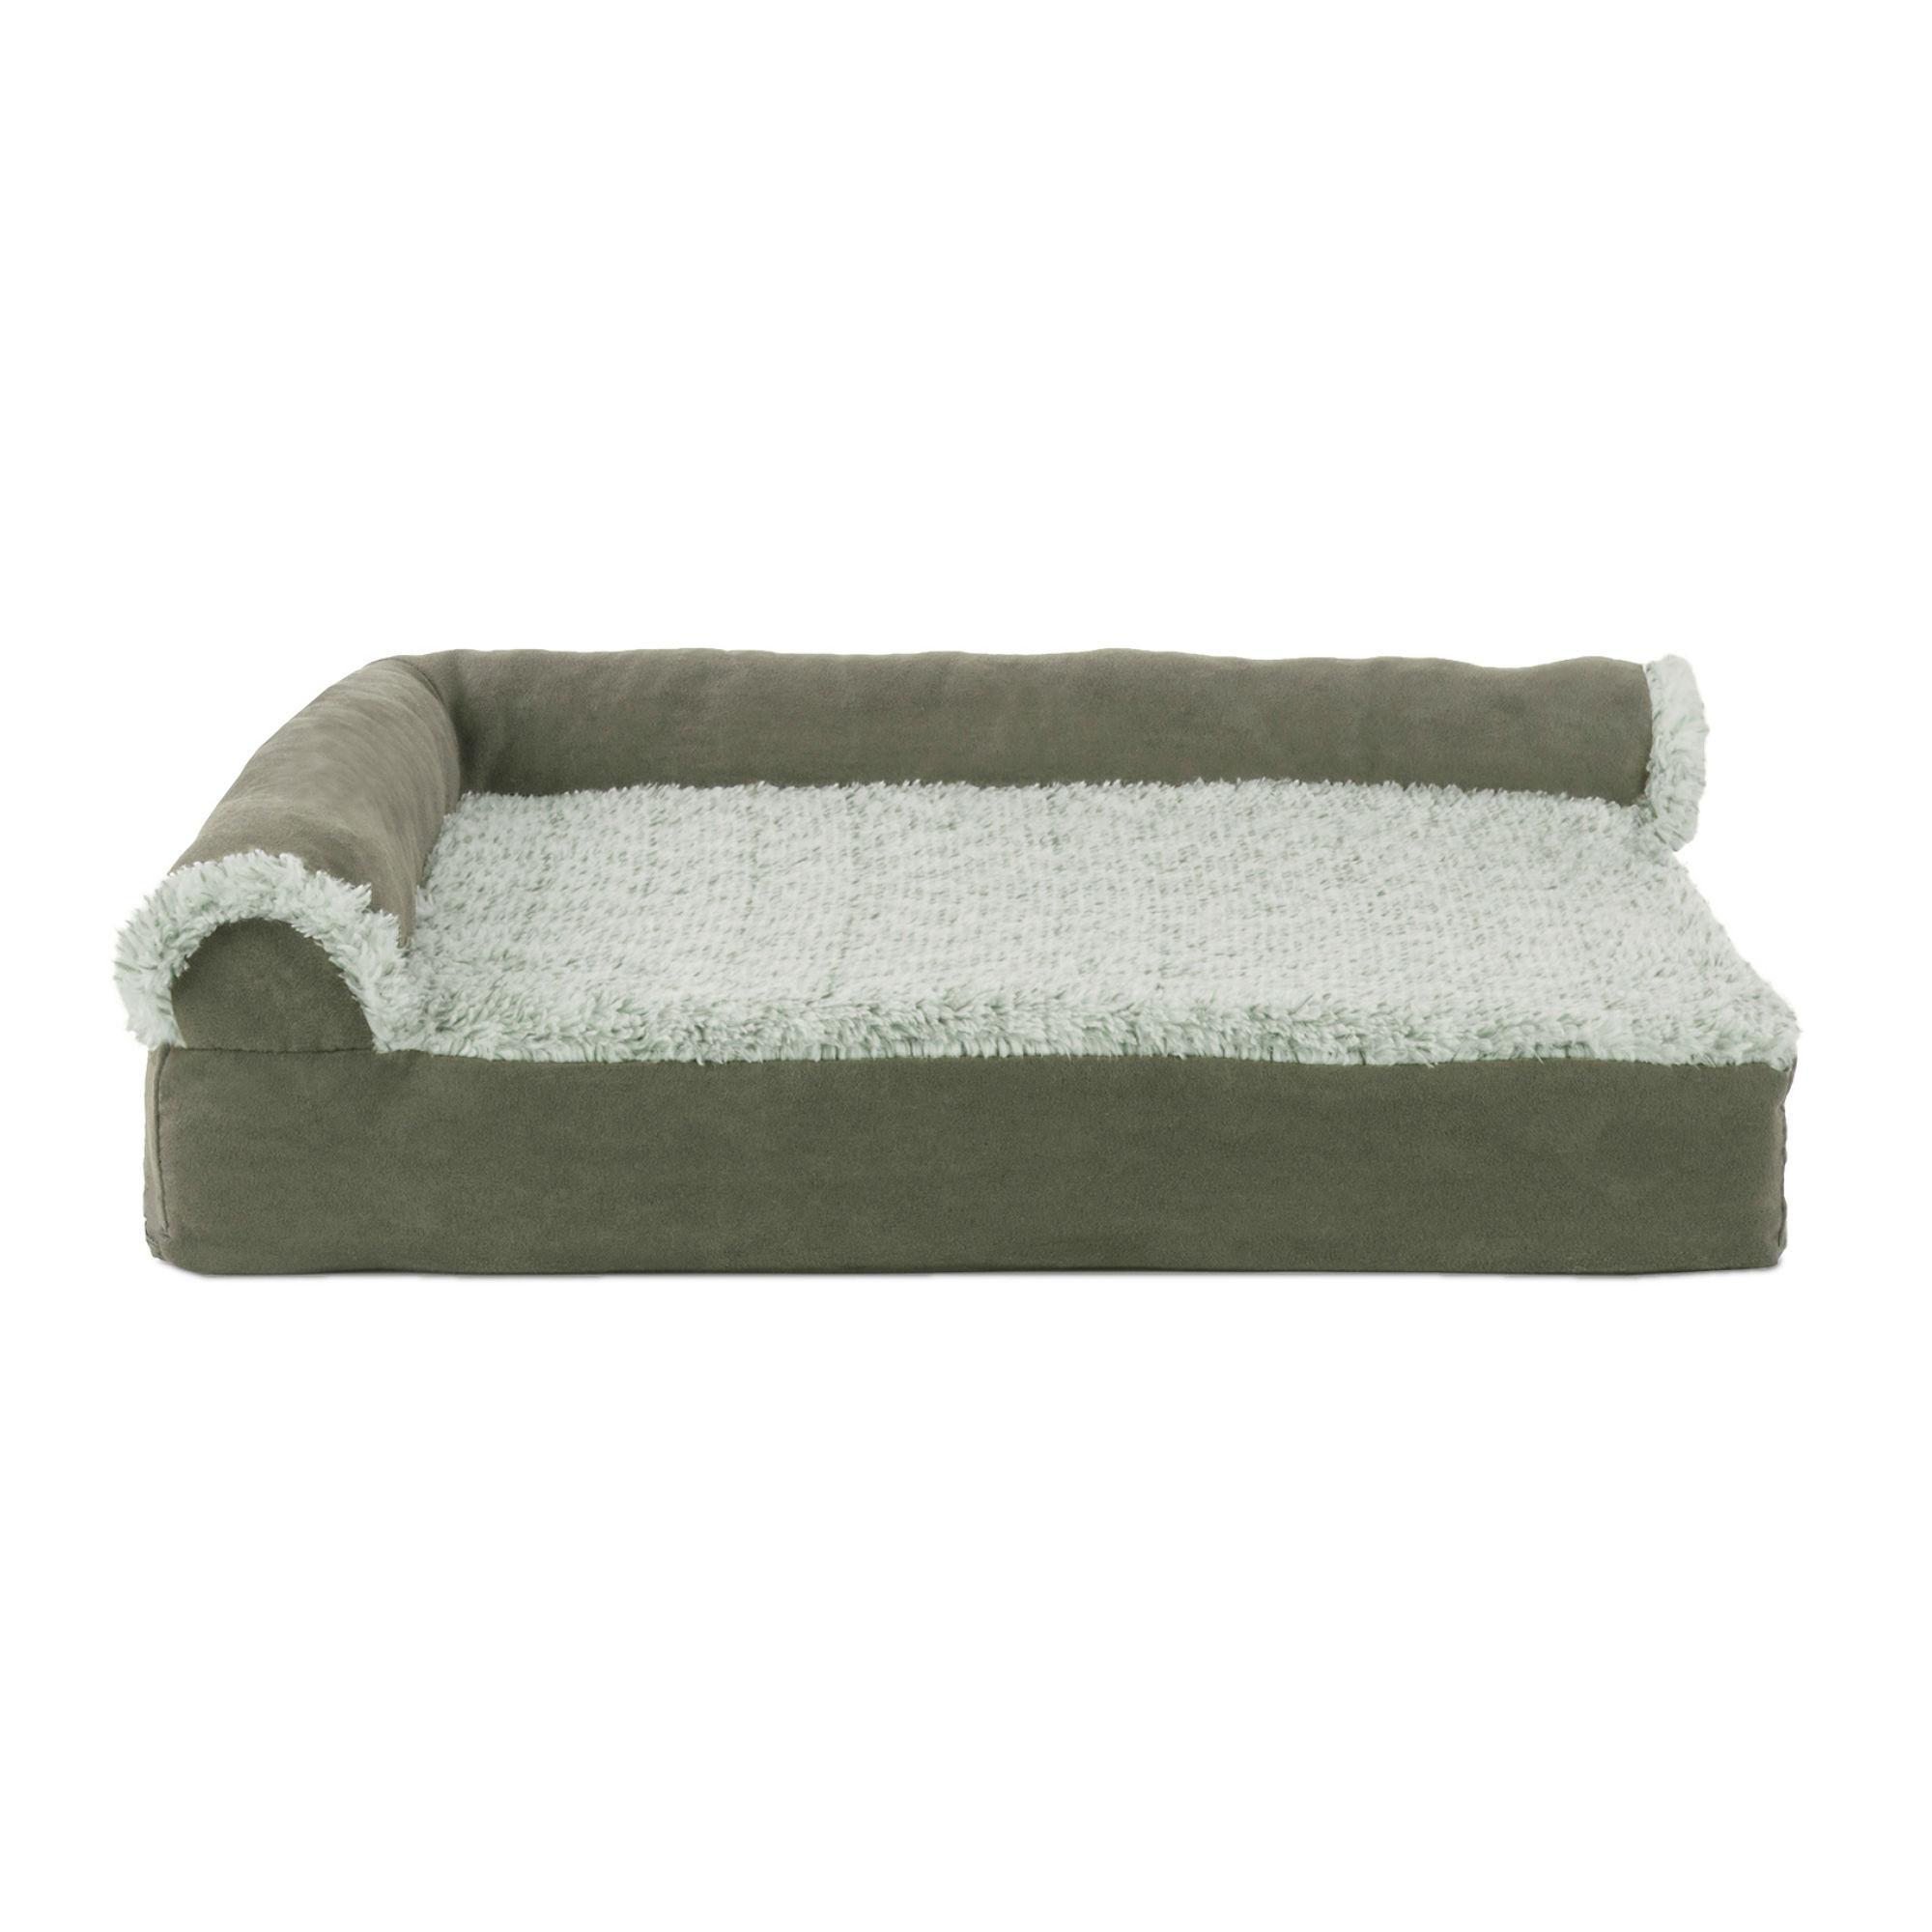 FurHaven Two-Tone Faux Fur & Suede Deluxe Chaise Lounge Cooling Gel Top Pet Bed - Dark Sage